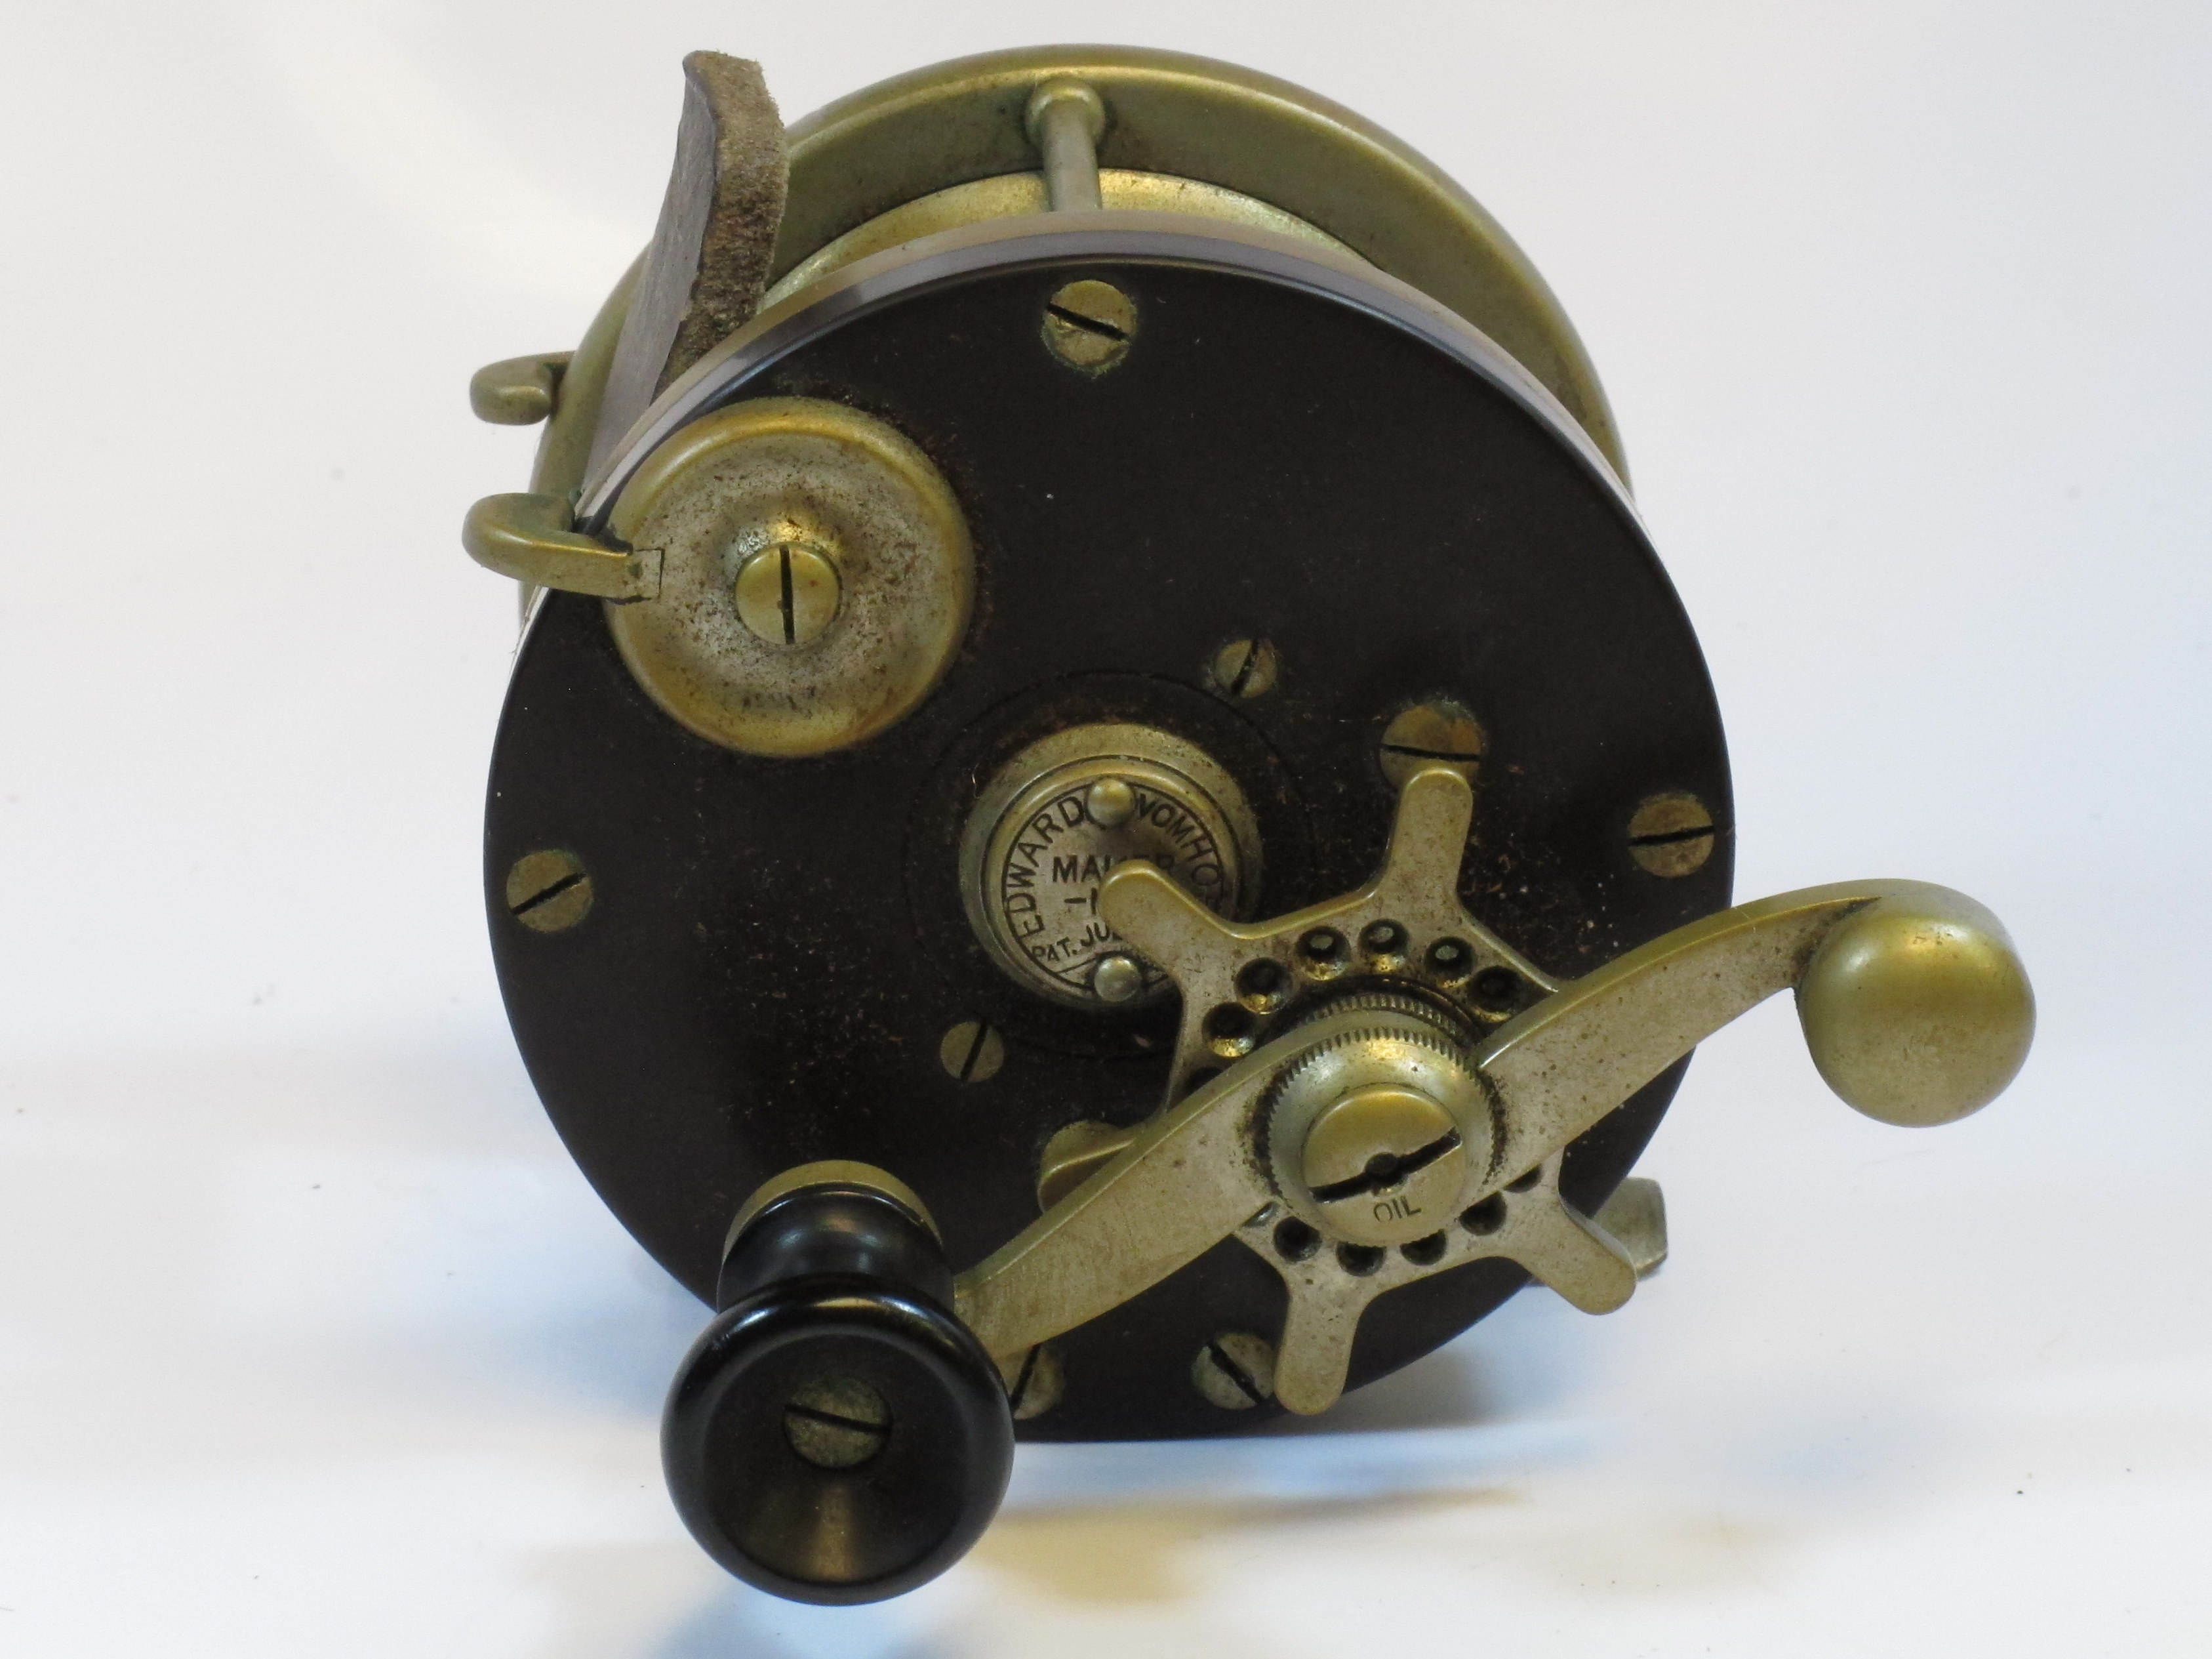 Reels - Antique and Vintage Fishing Tackle